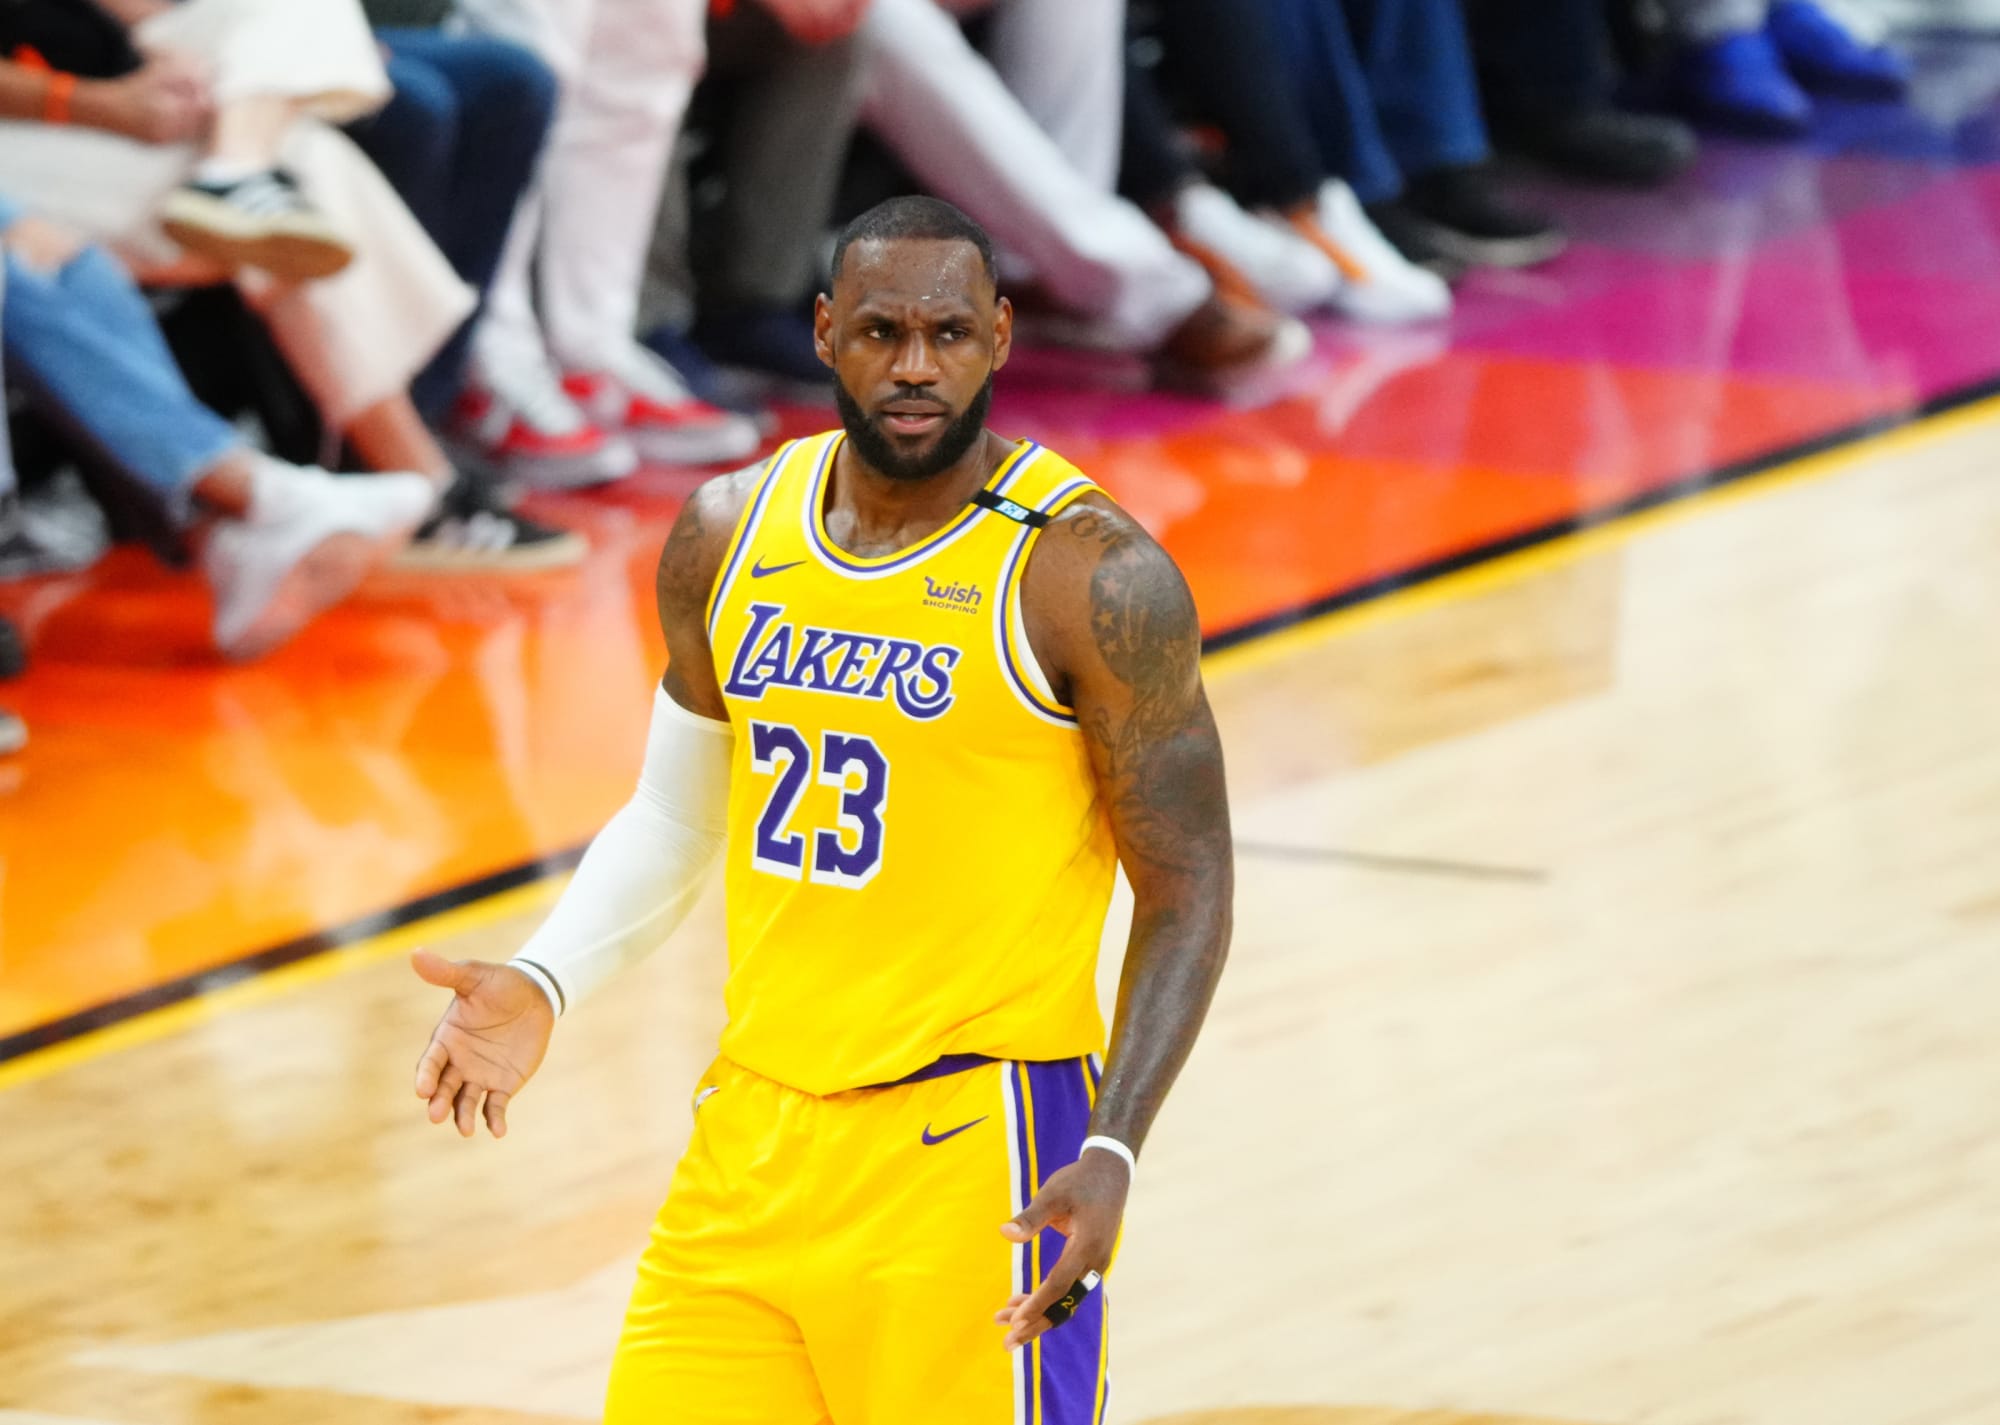 LeBron James becomes a billionaire while still playing in the NBA